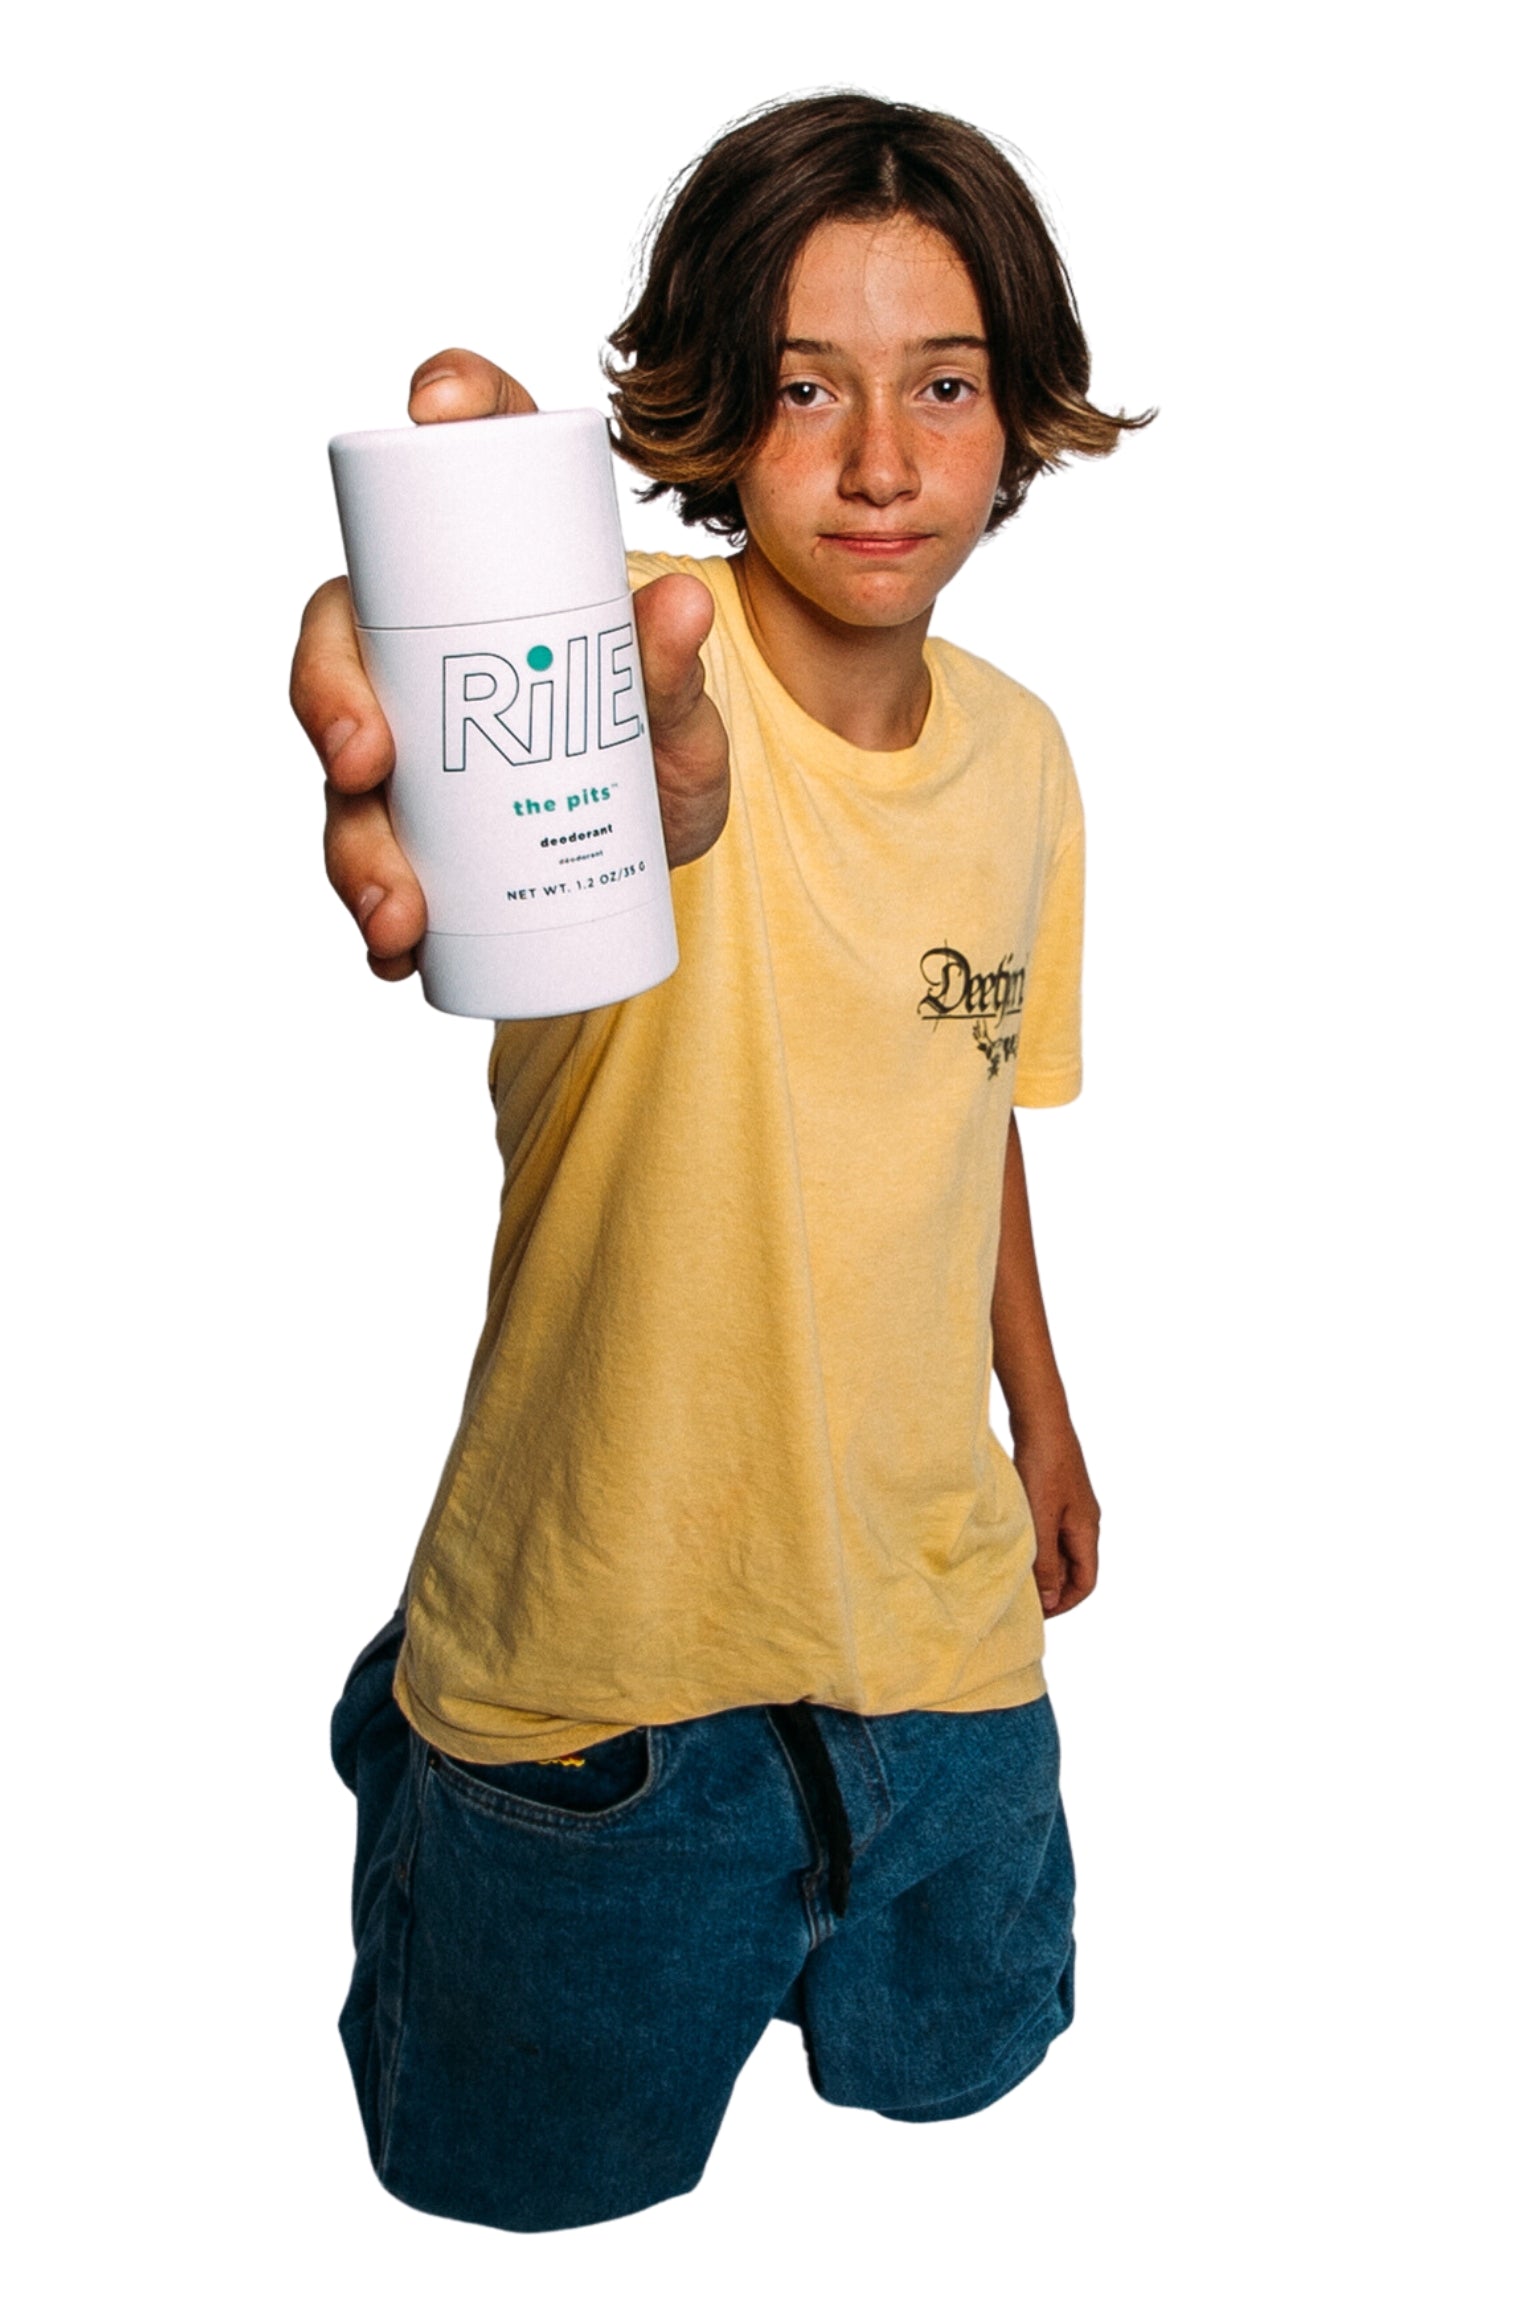 A young teen or tween boy is holding the Rile aluminum free deodorant stick to camera. This kid needs teen hygiene.